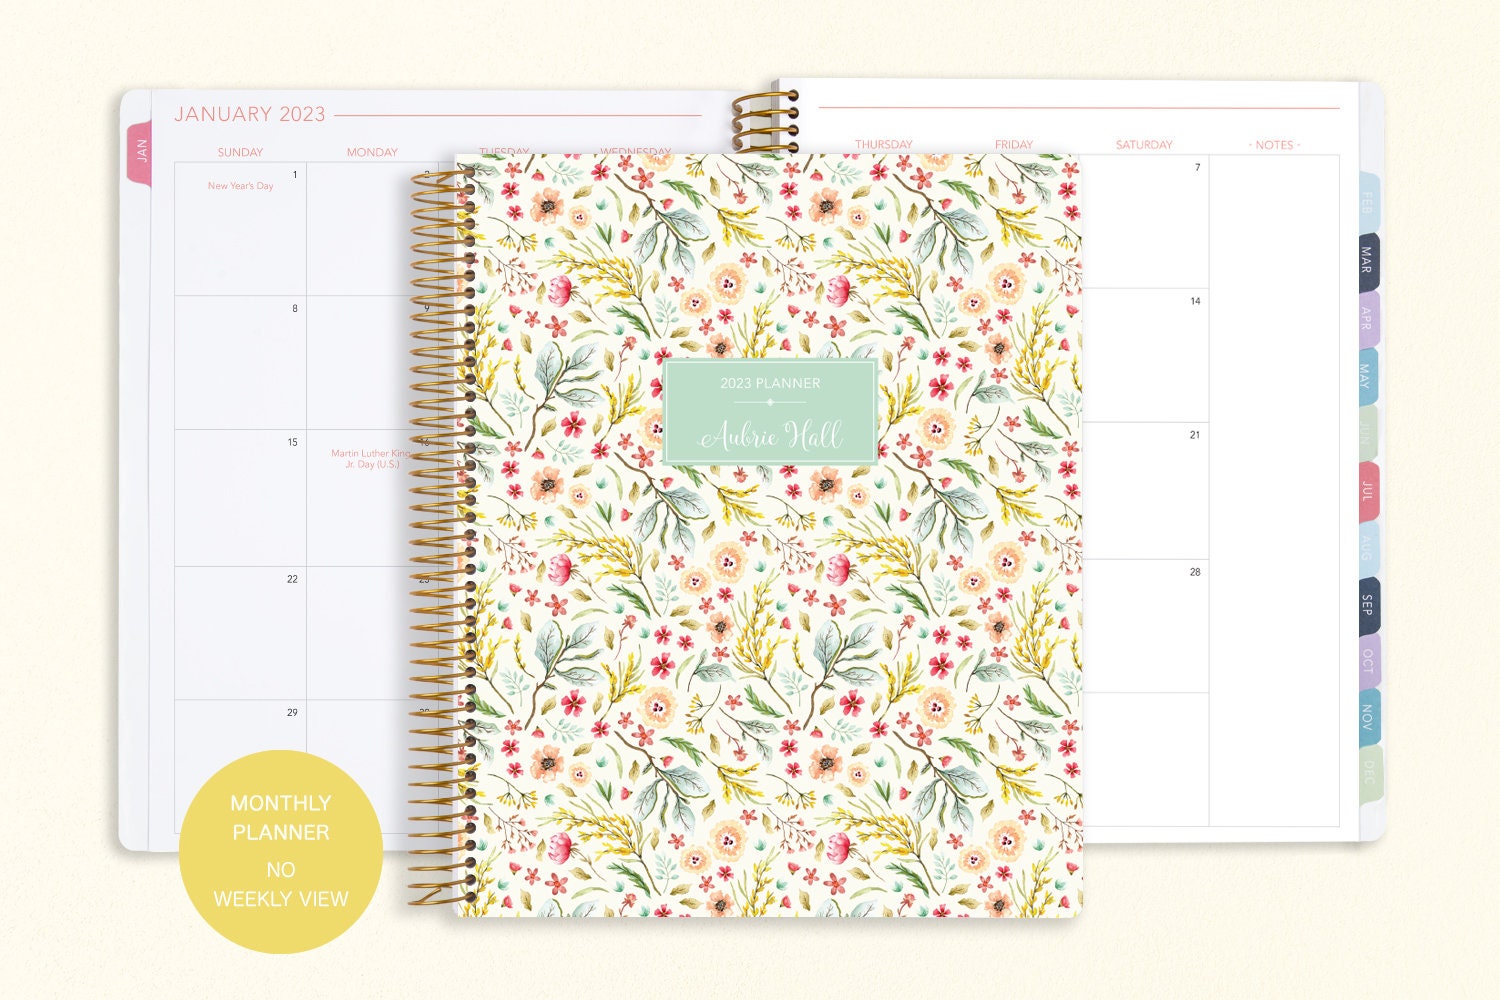 8.5x11 MONTHLY PLANNER Notebook 2023 2024 No Weekly View photo photo